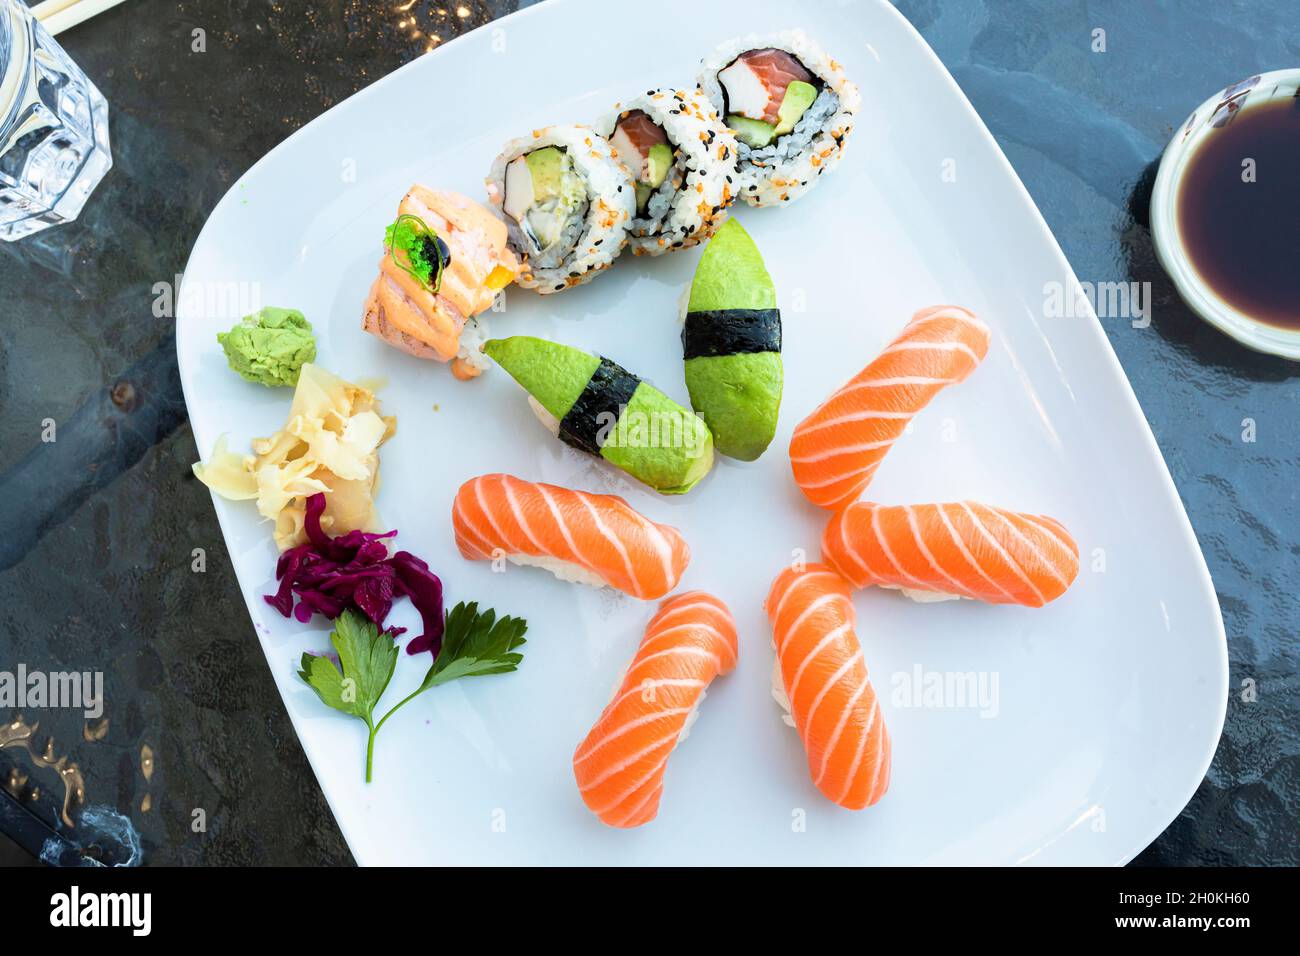 Sushi plate on a table outdoors at a restaurant. The plate has nigiri sushi with salmon, nigiri sushi with avocado and california rolls. Healthy diet Stock Photo